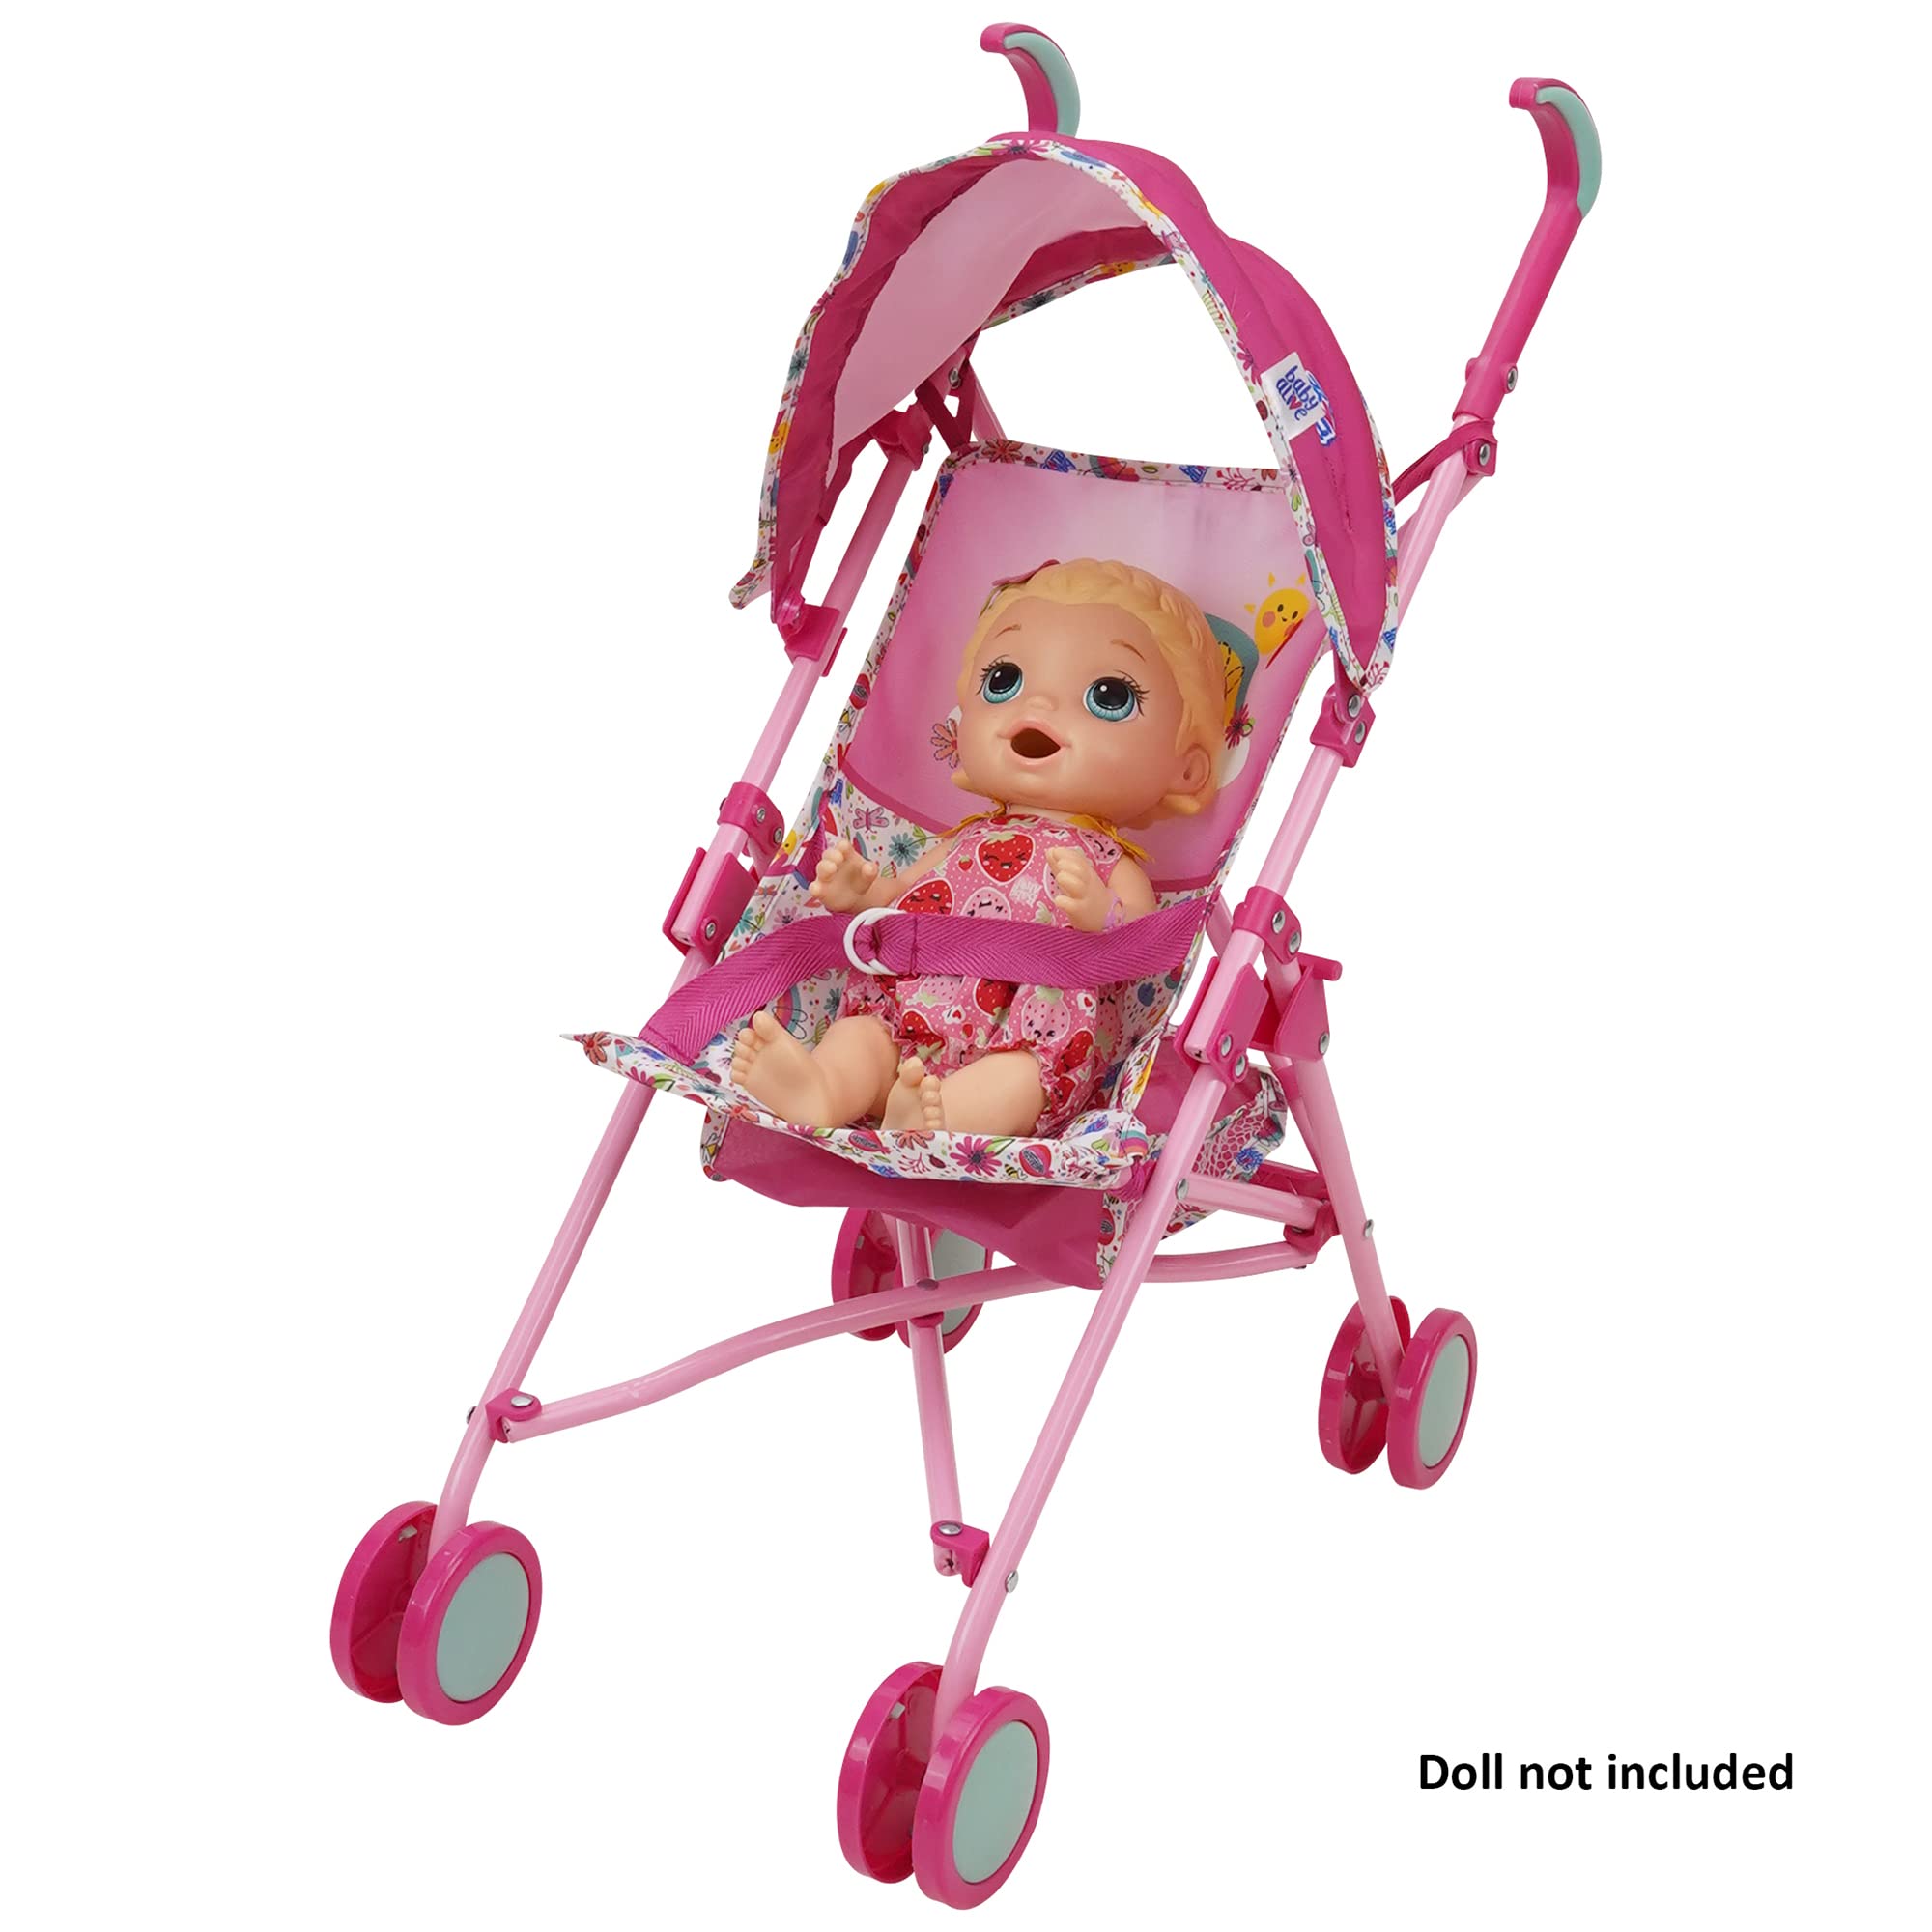 Baby Alive: Doll Stroller - Pink & Rainbow - Fits Dolls Up to 24